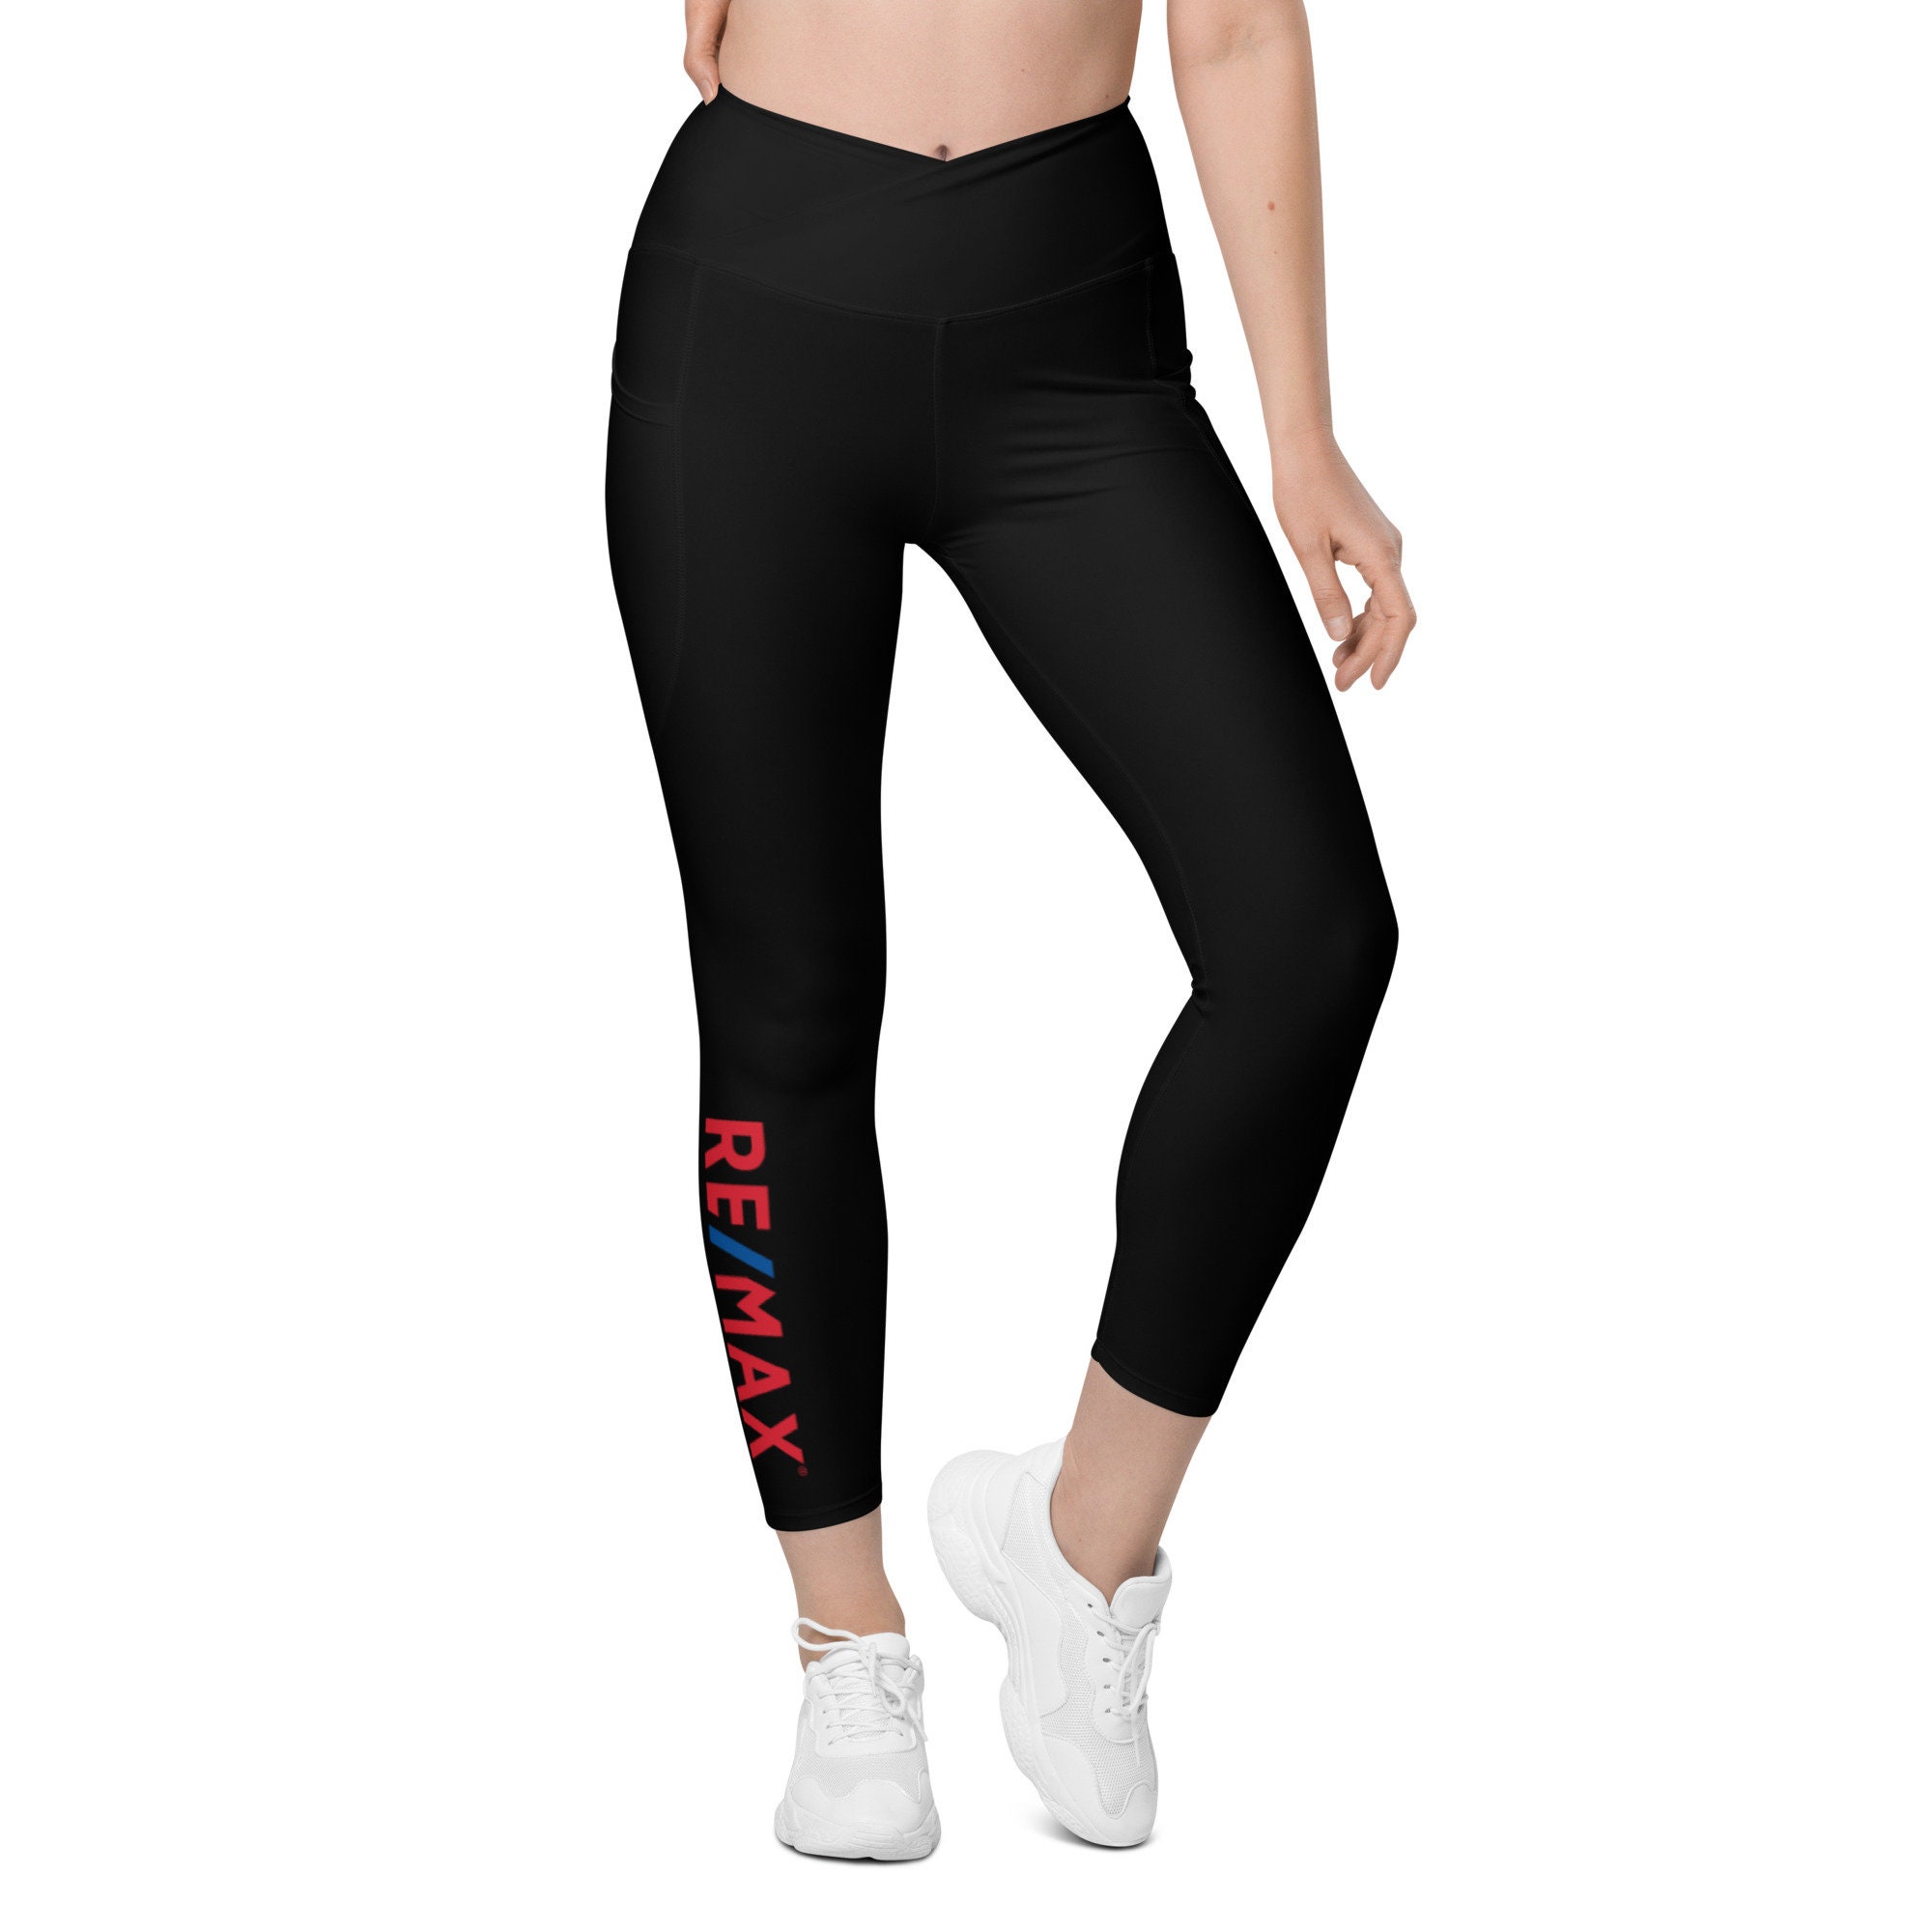 RE/MAX Crossover Leggings With Pockets, REMAX Realty Leggings